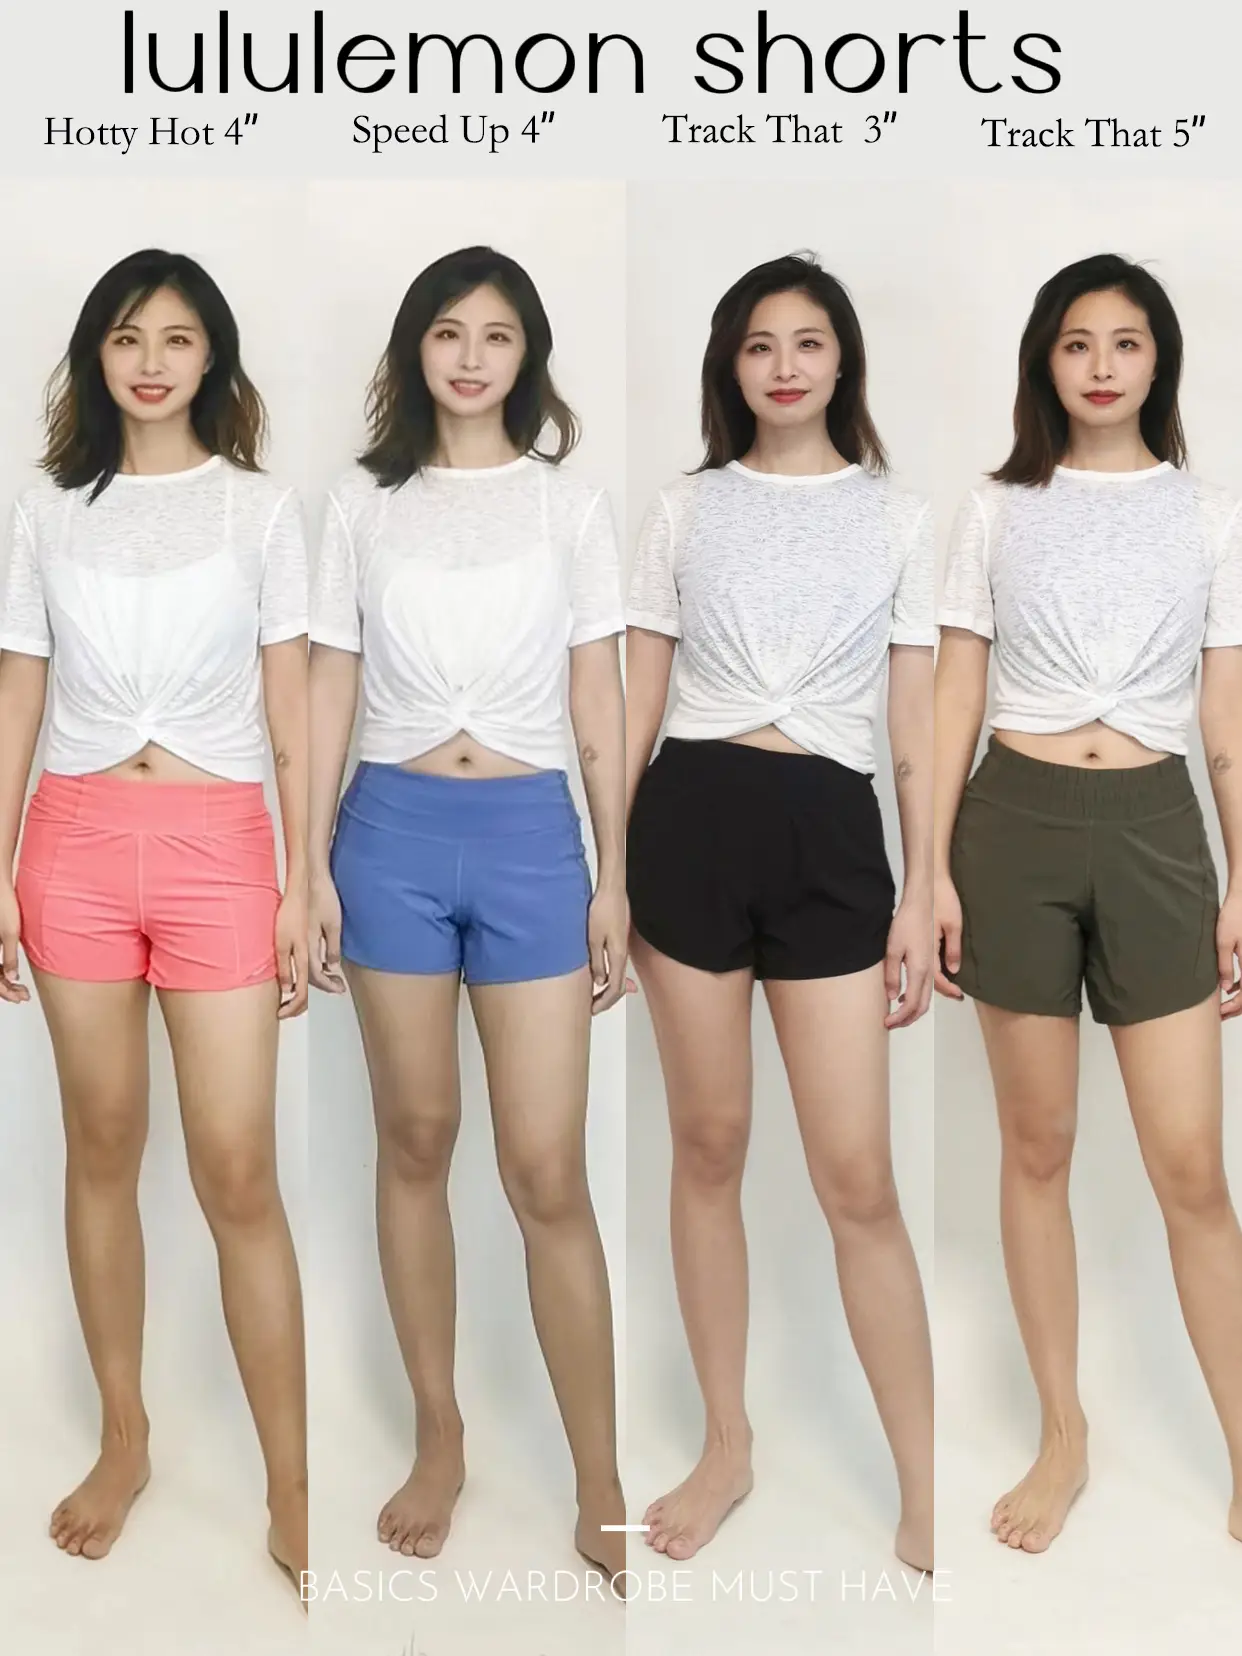 best shorts for summer fitness-4 lululemon shorts, Gallery posted by  atreeeeee_